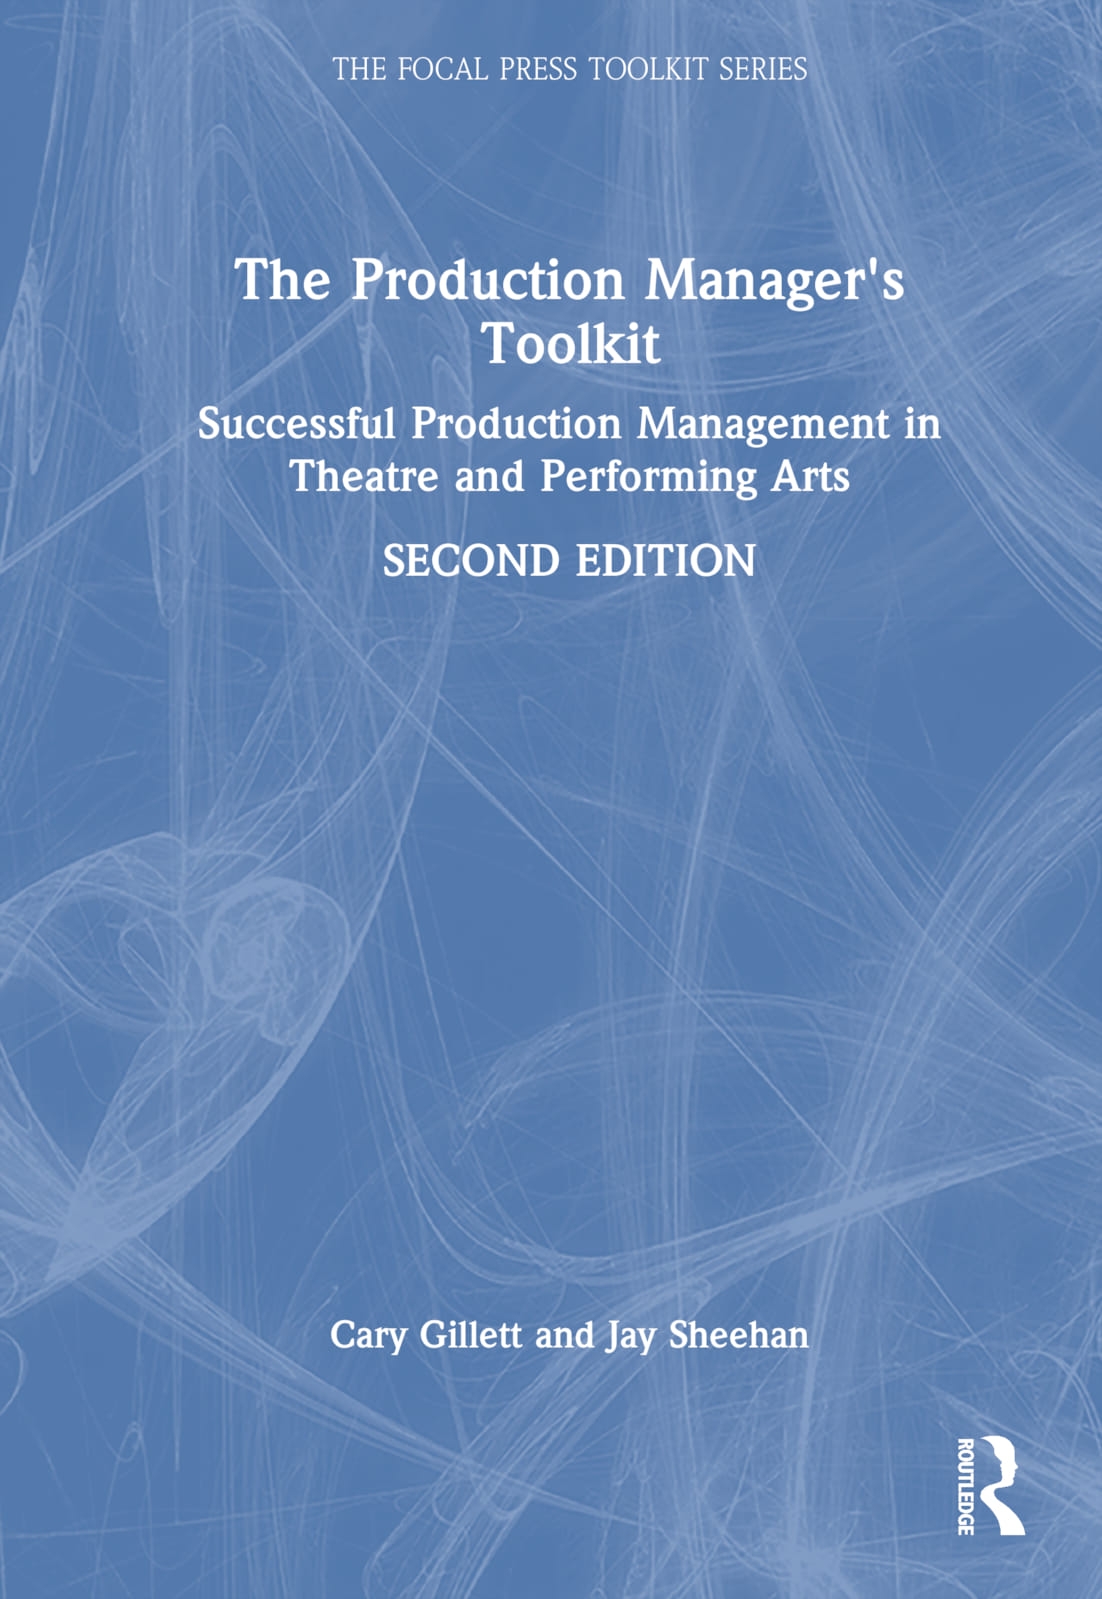 The Production Manager’s Toolkit: Successful Production Management in Theatre and Performing Arts